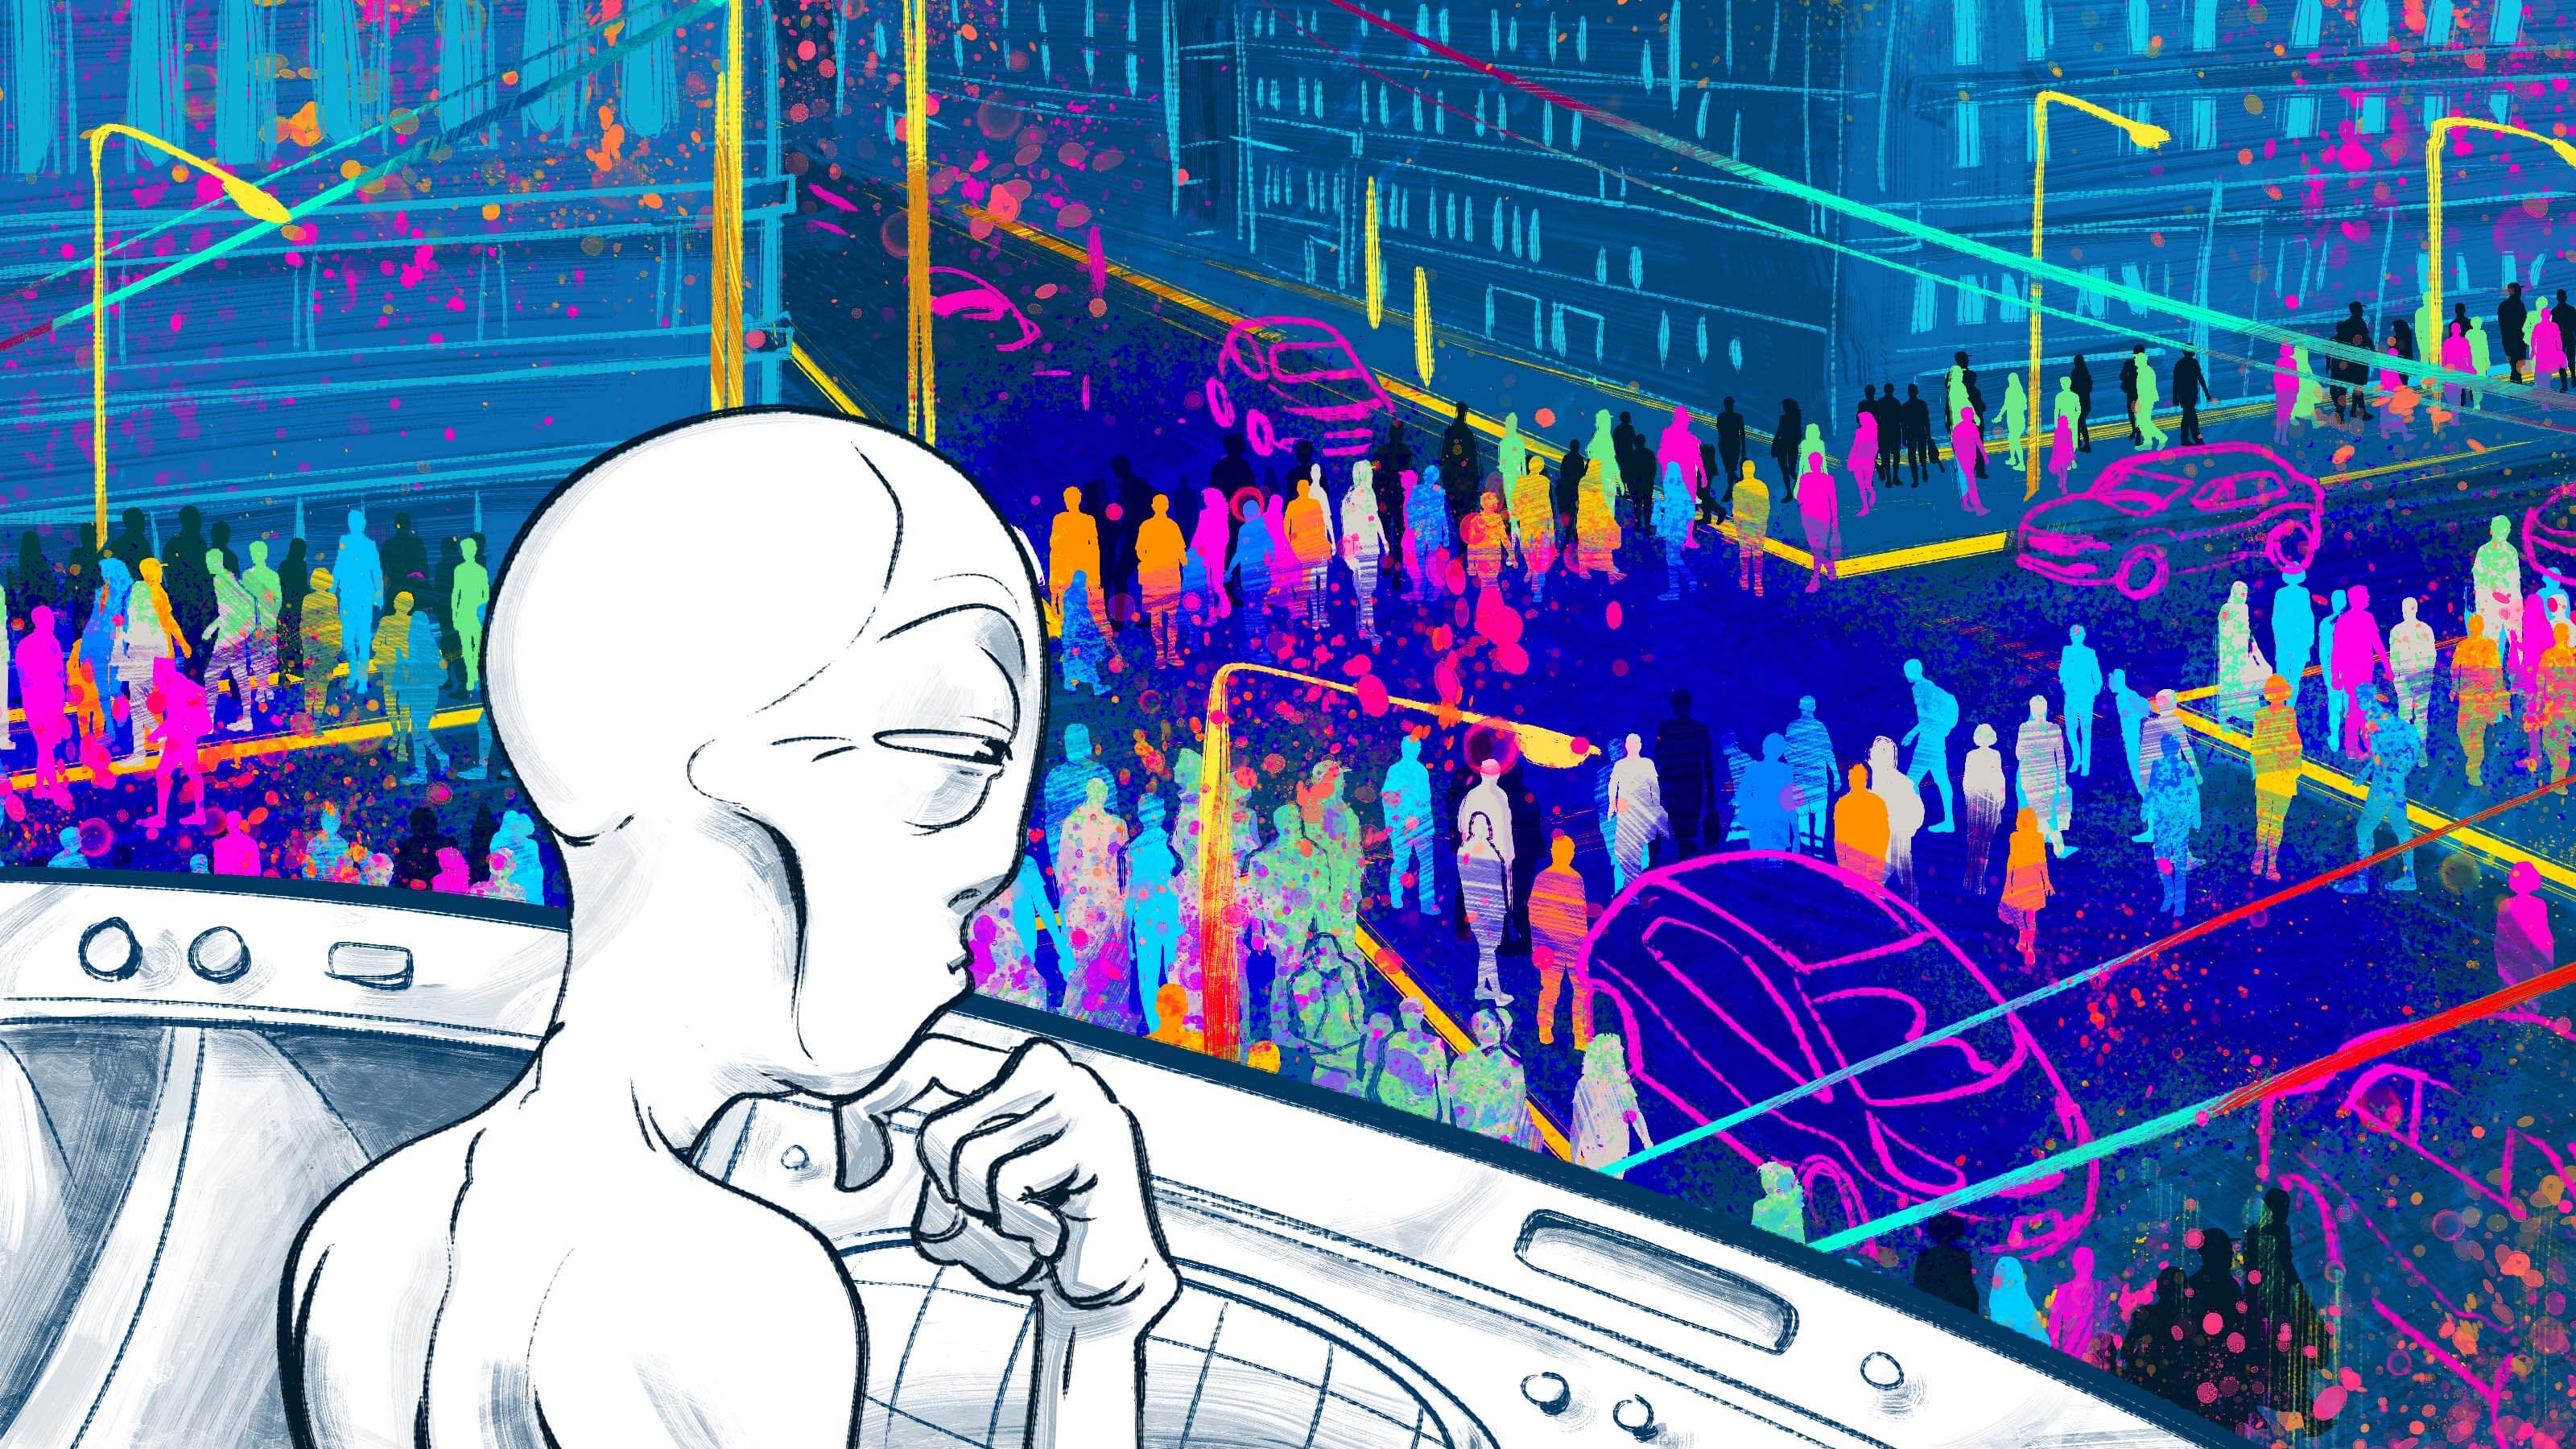 A colorful illustration of an alien looking out from a spaceship over a busy city intersection.